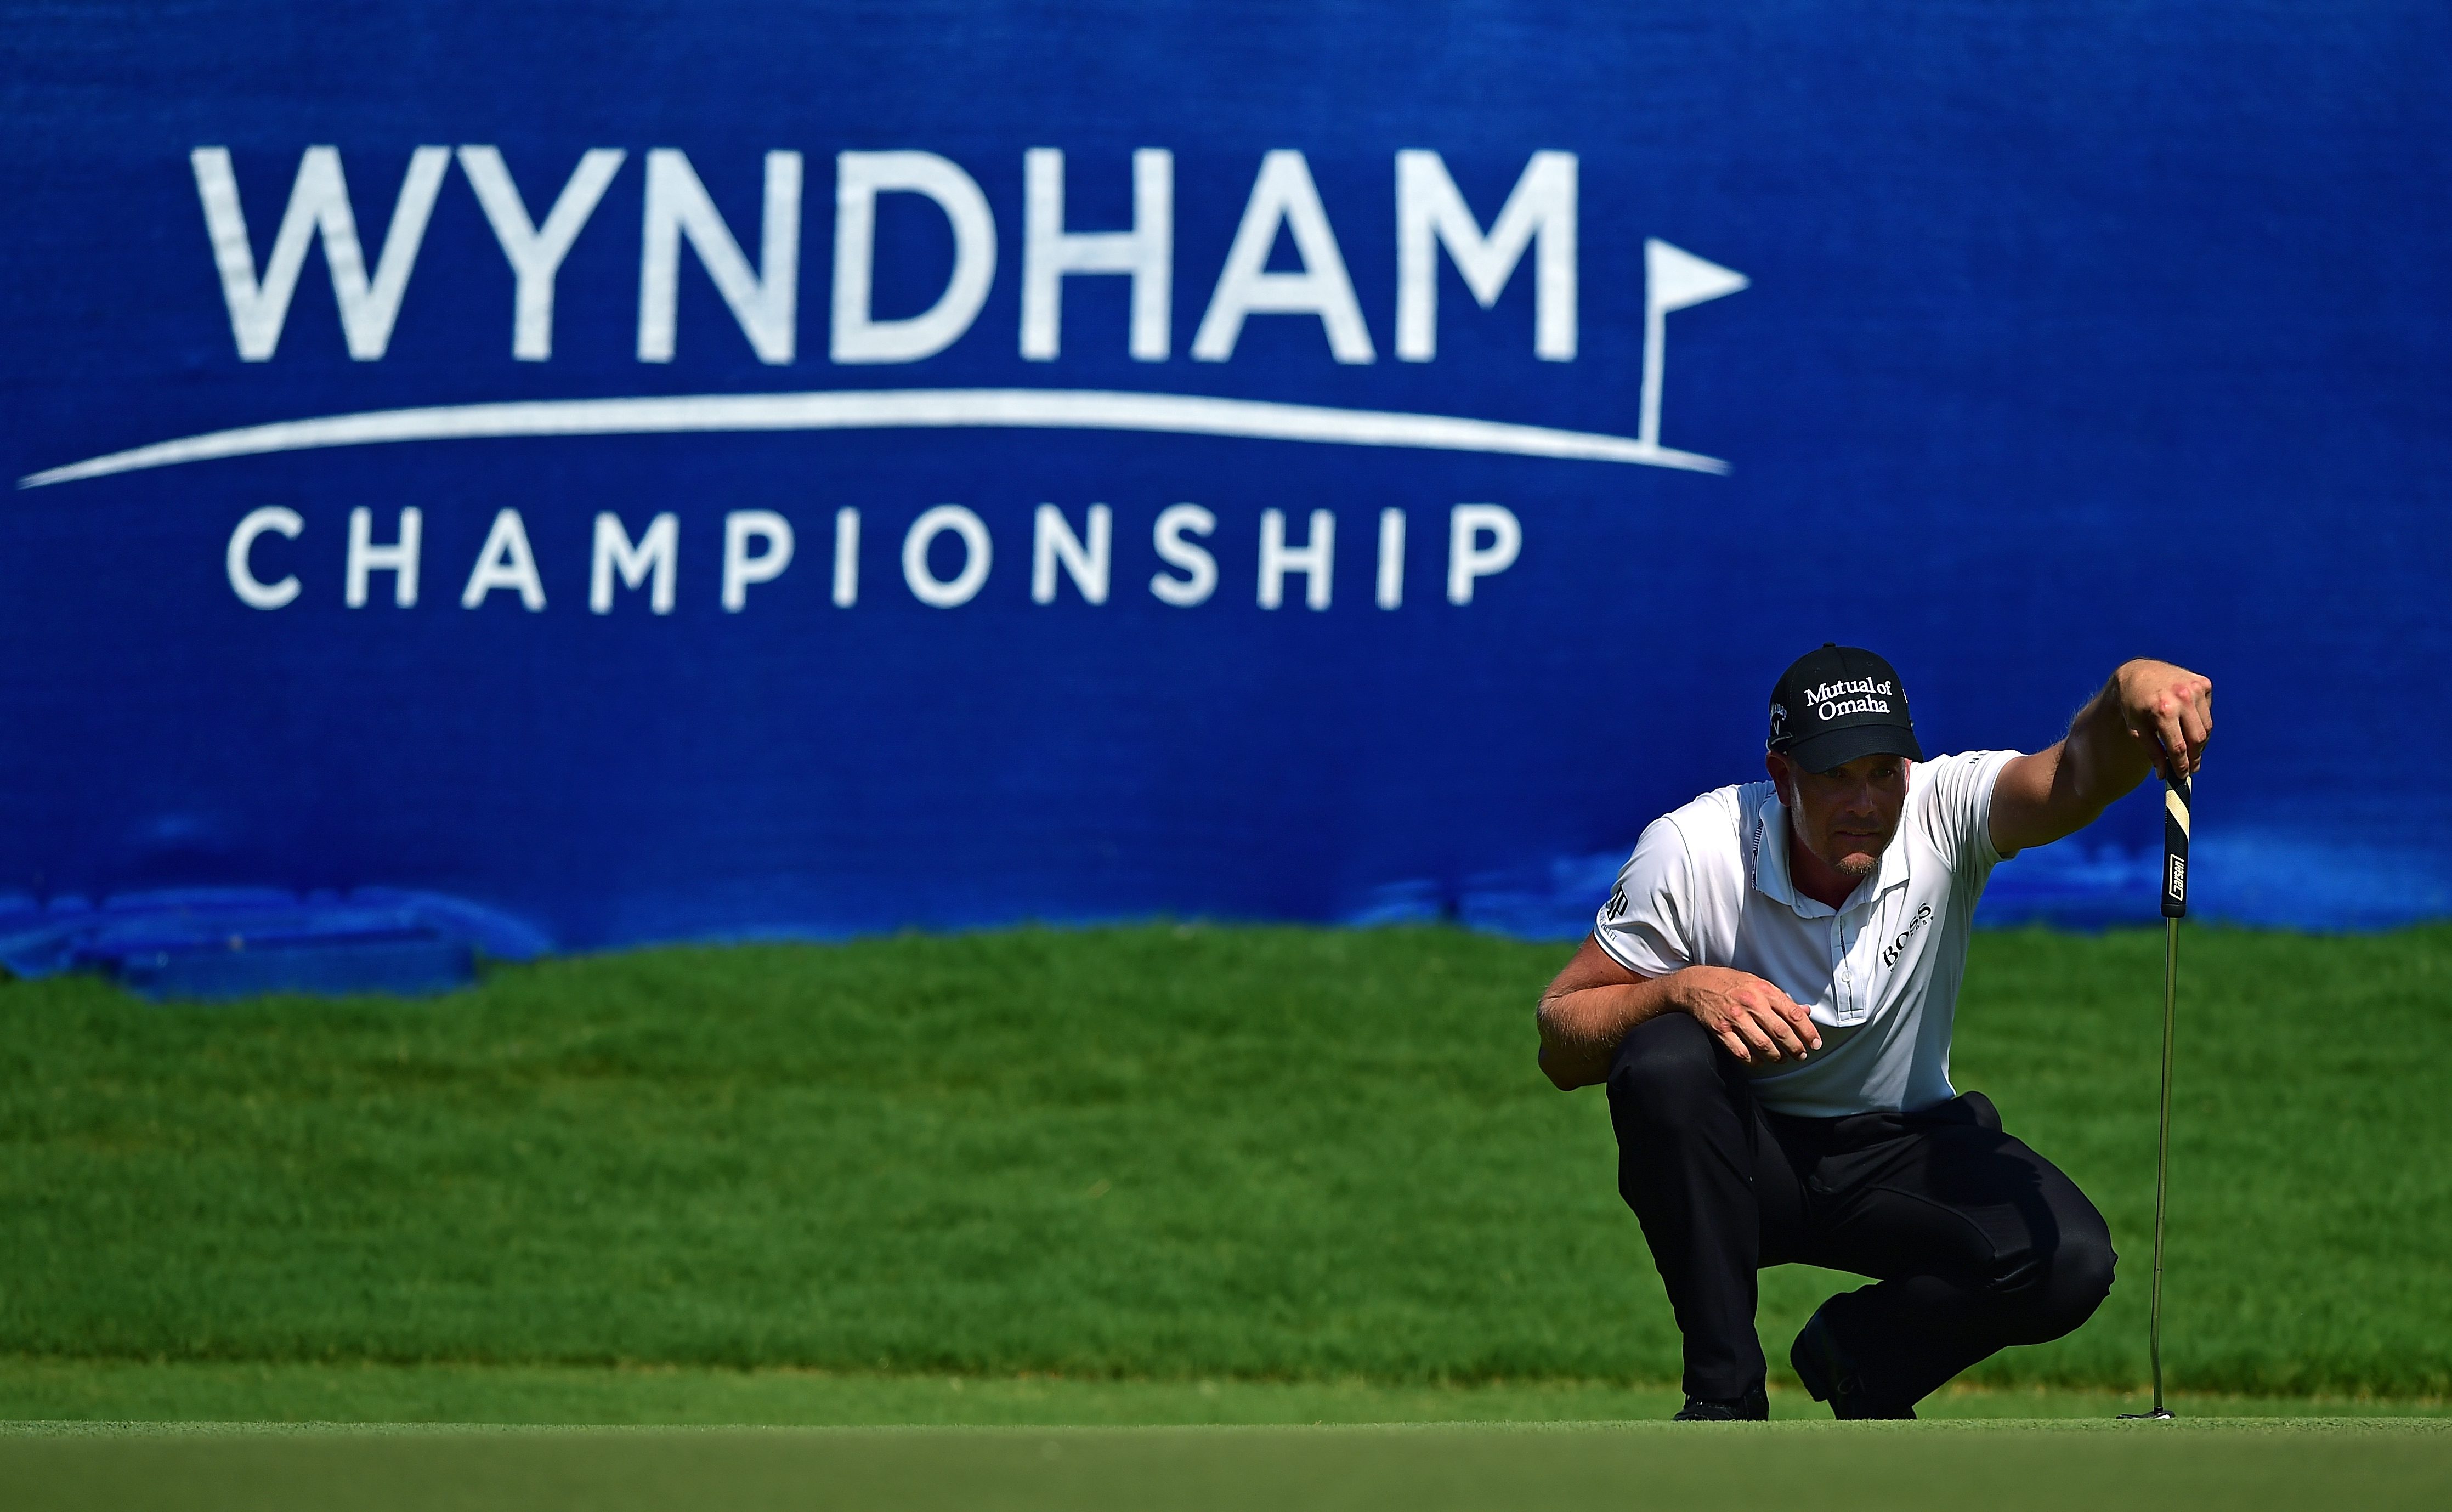 How to Watch Wyndham Championship in the UK